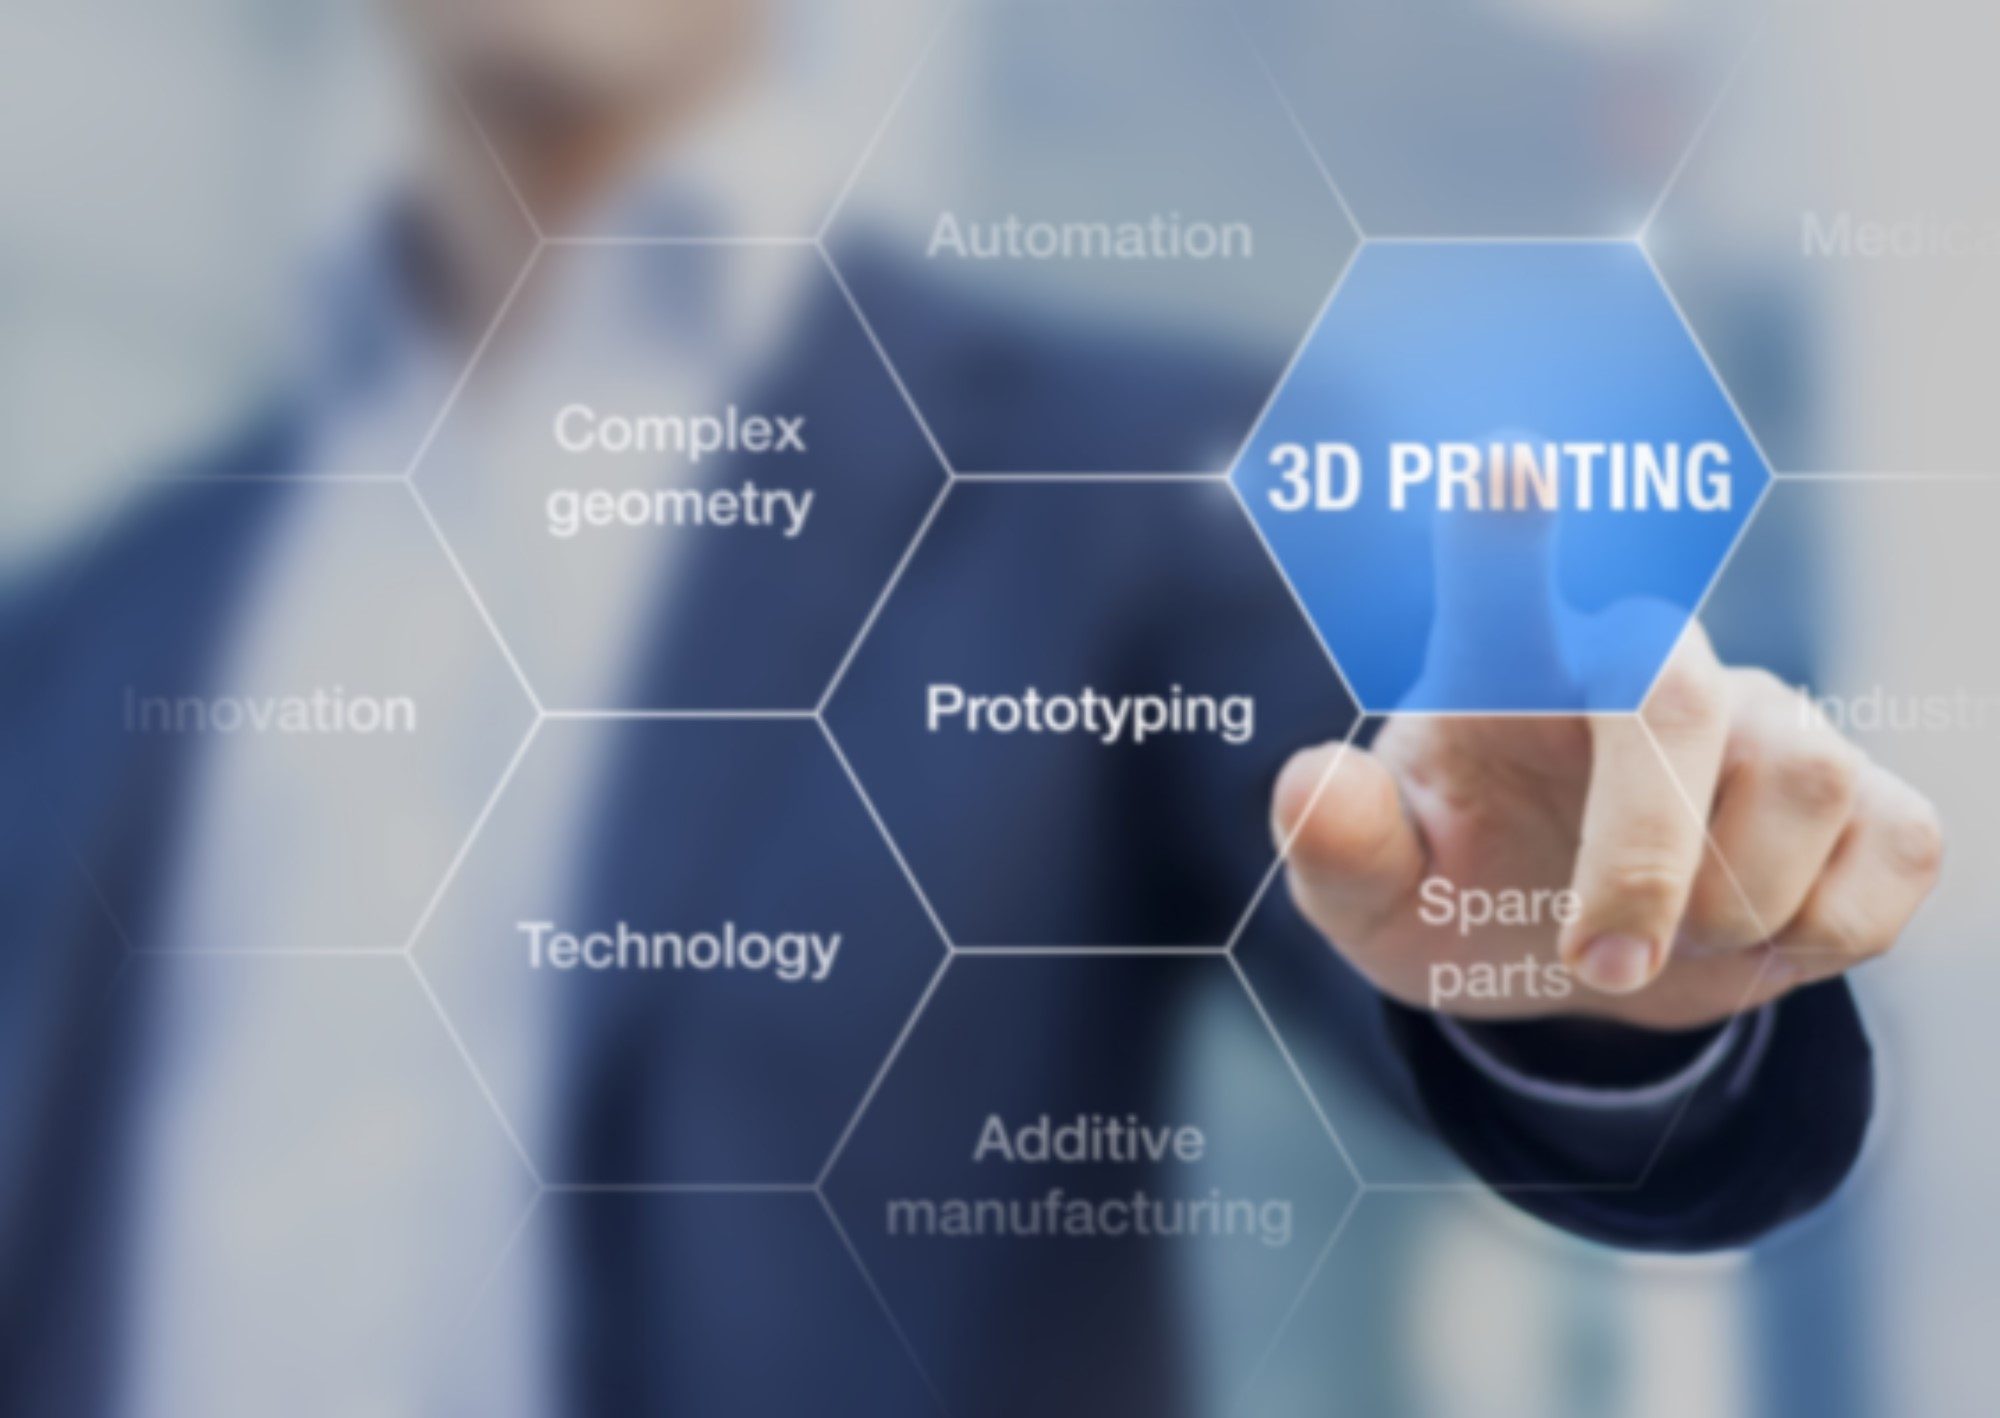 Additive Manufacturing and 3D Printing concepts